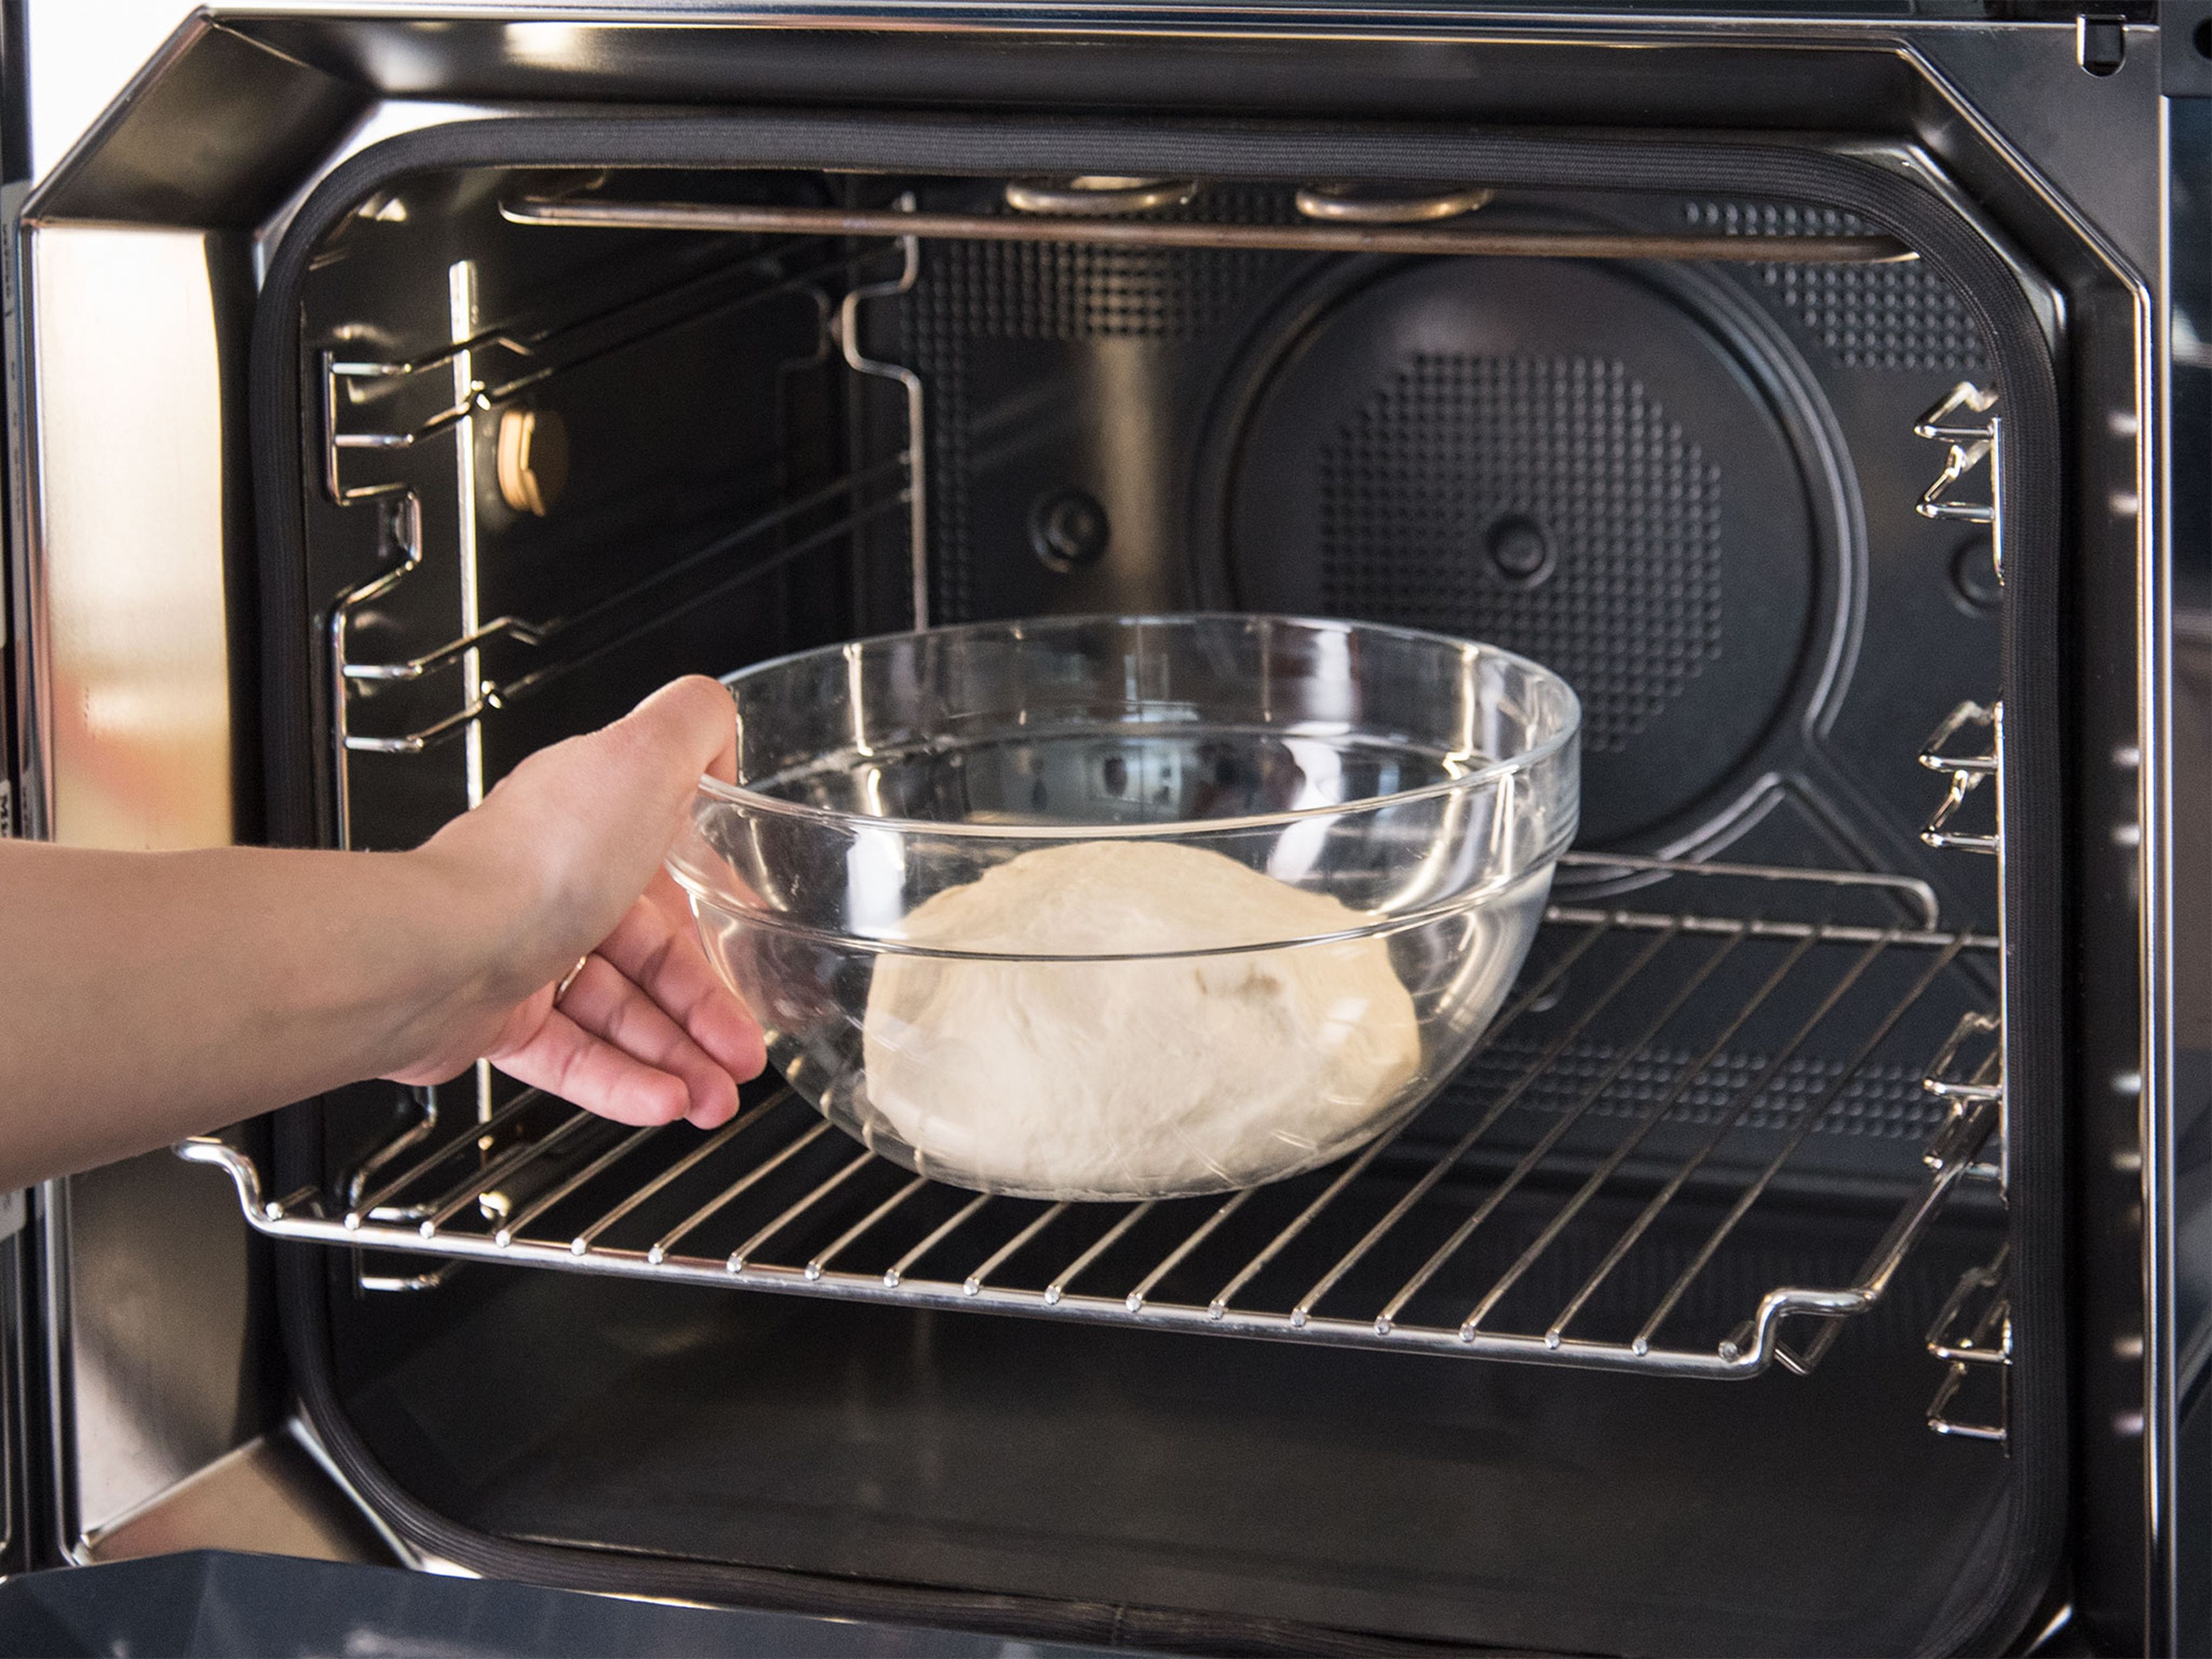 Transfer dough to a clean bowl and into the dialog oven to rise using the automatic program “cake / yeast dough” for 30 min. The dough should double in volume.